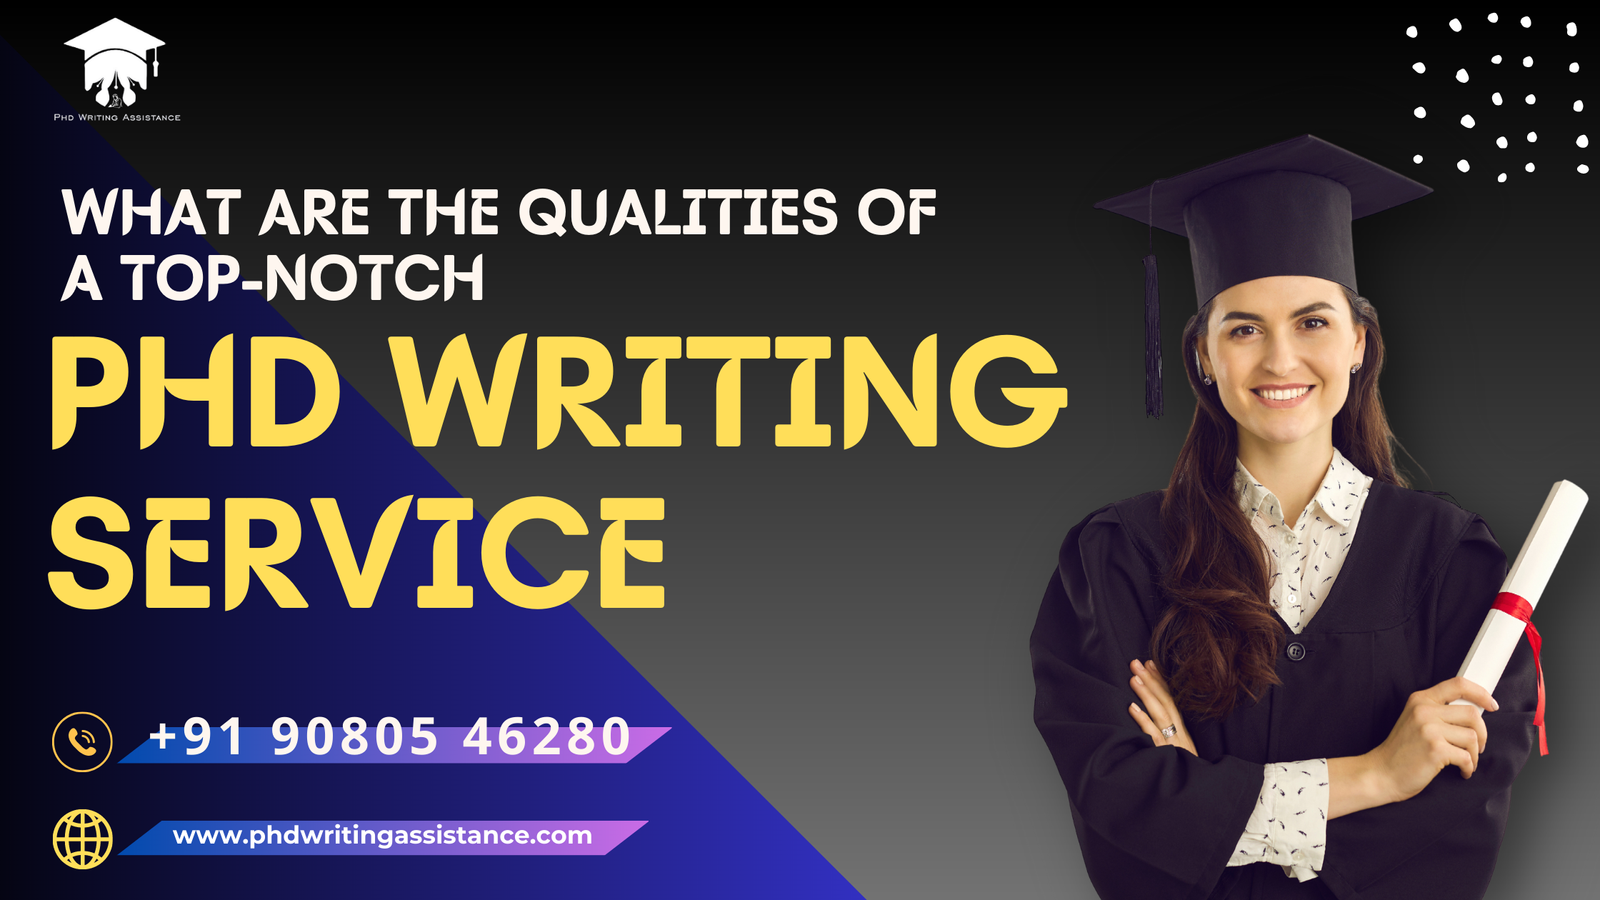 What are the qualities of a top-notch PhD writing service?